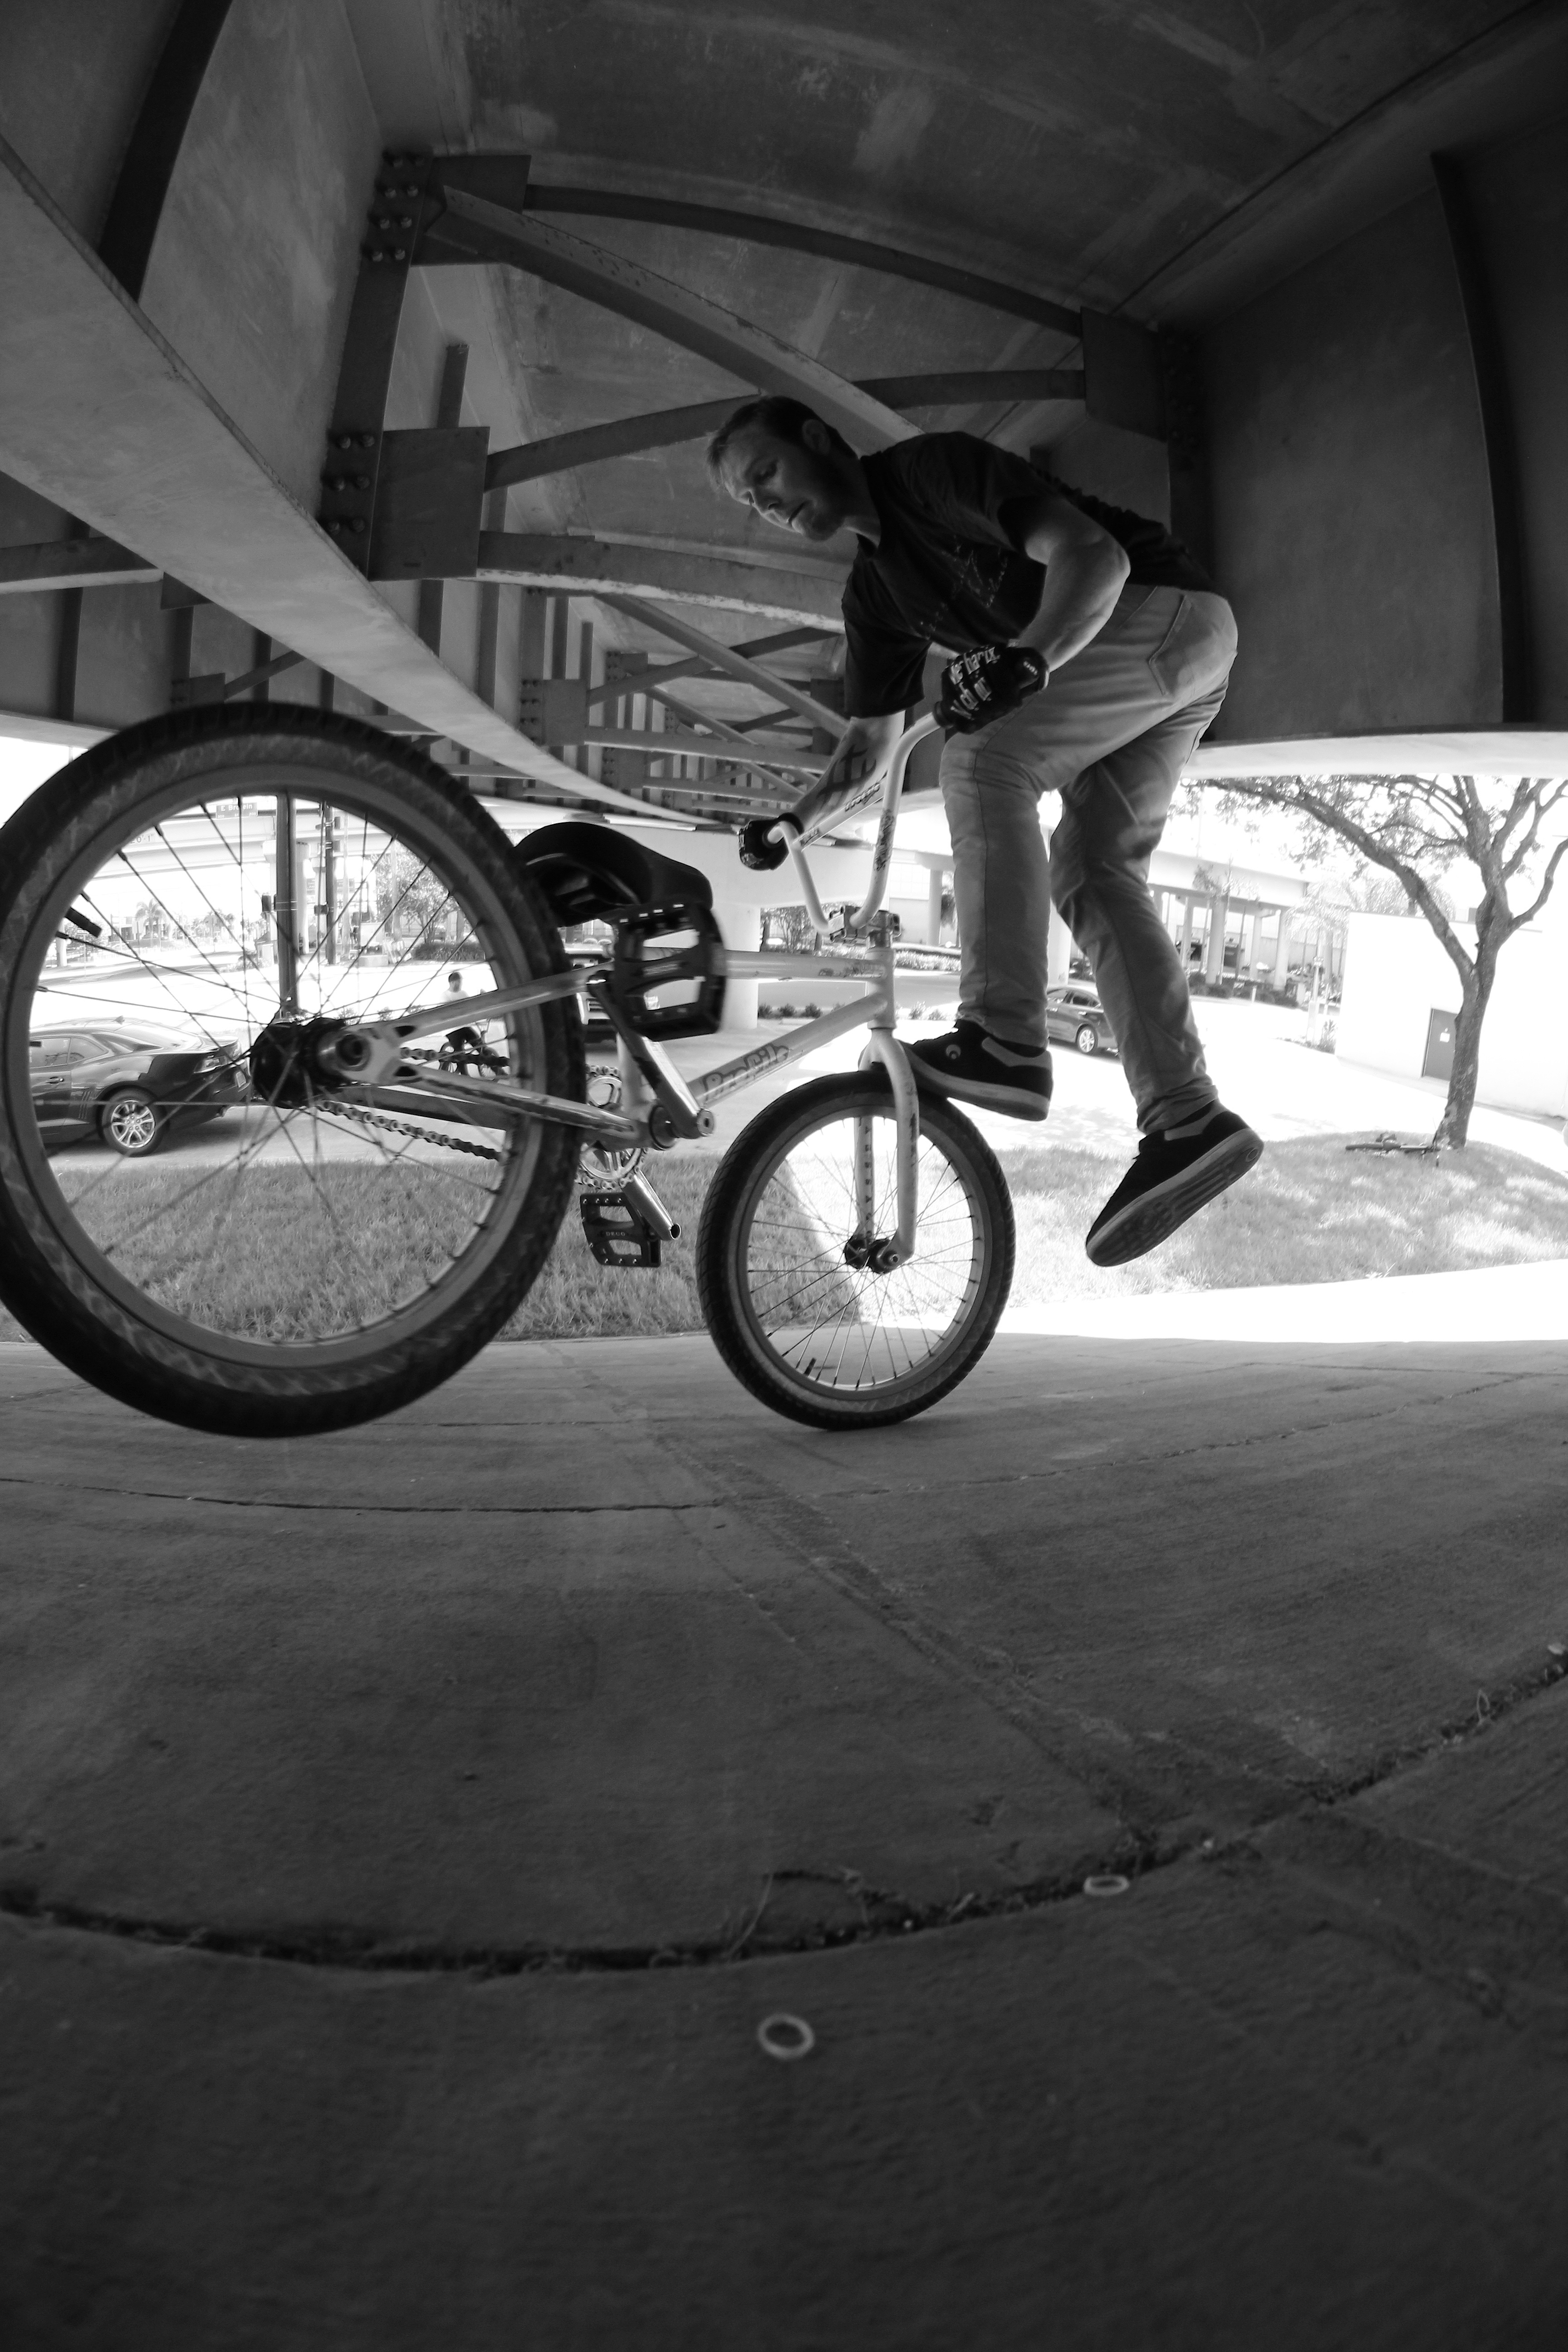 Thomas Sanders: Nosewhip on a freshly cleaned spot under an old bridge.